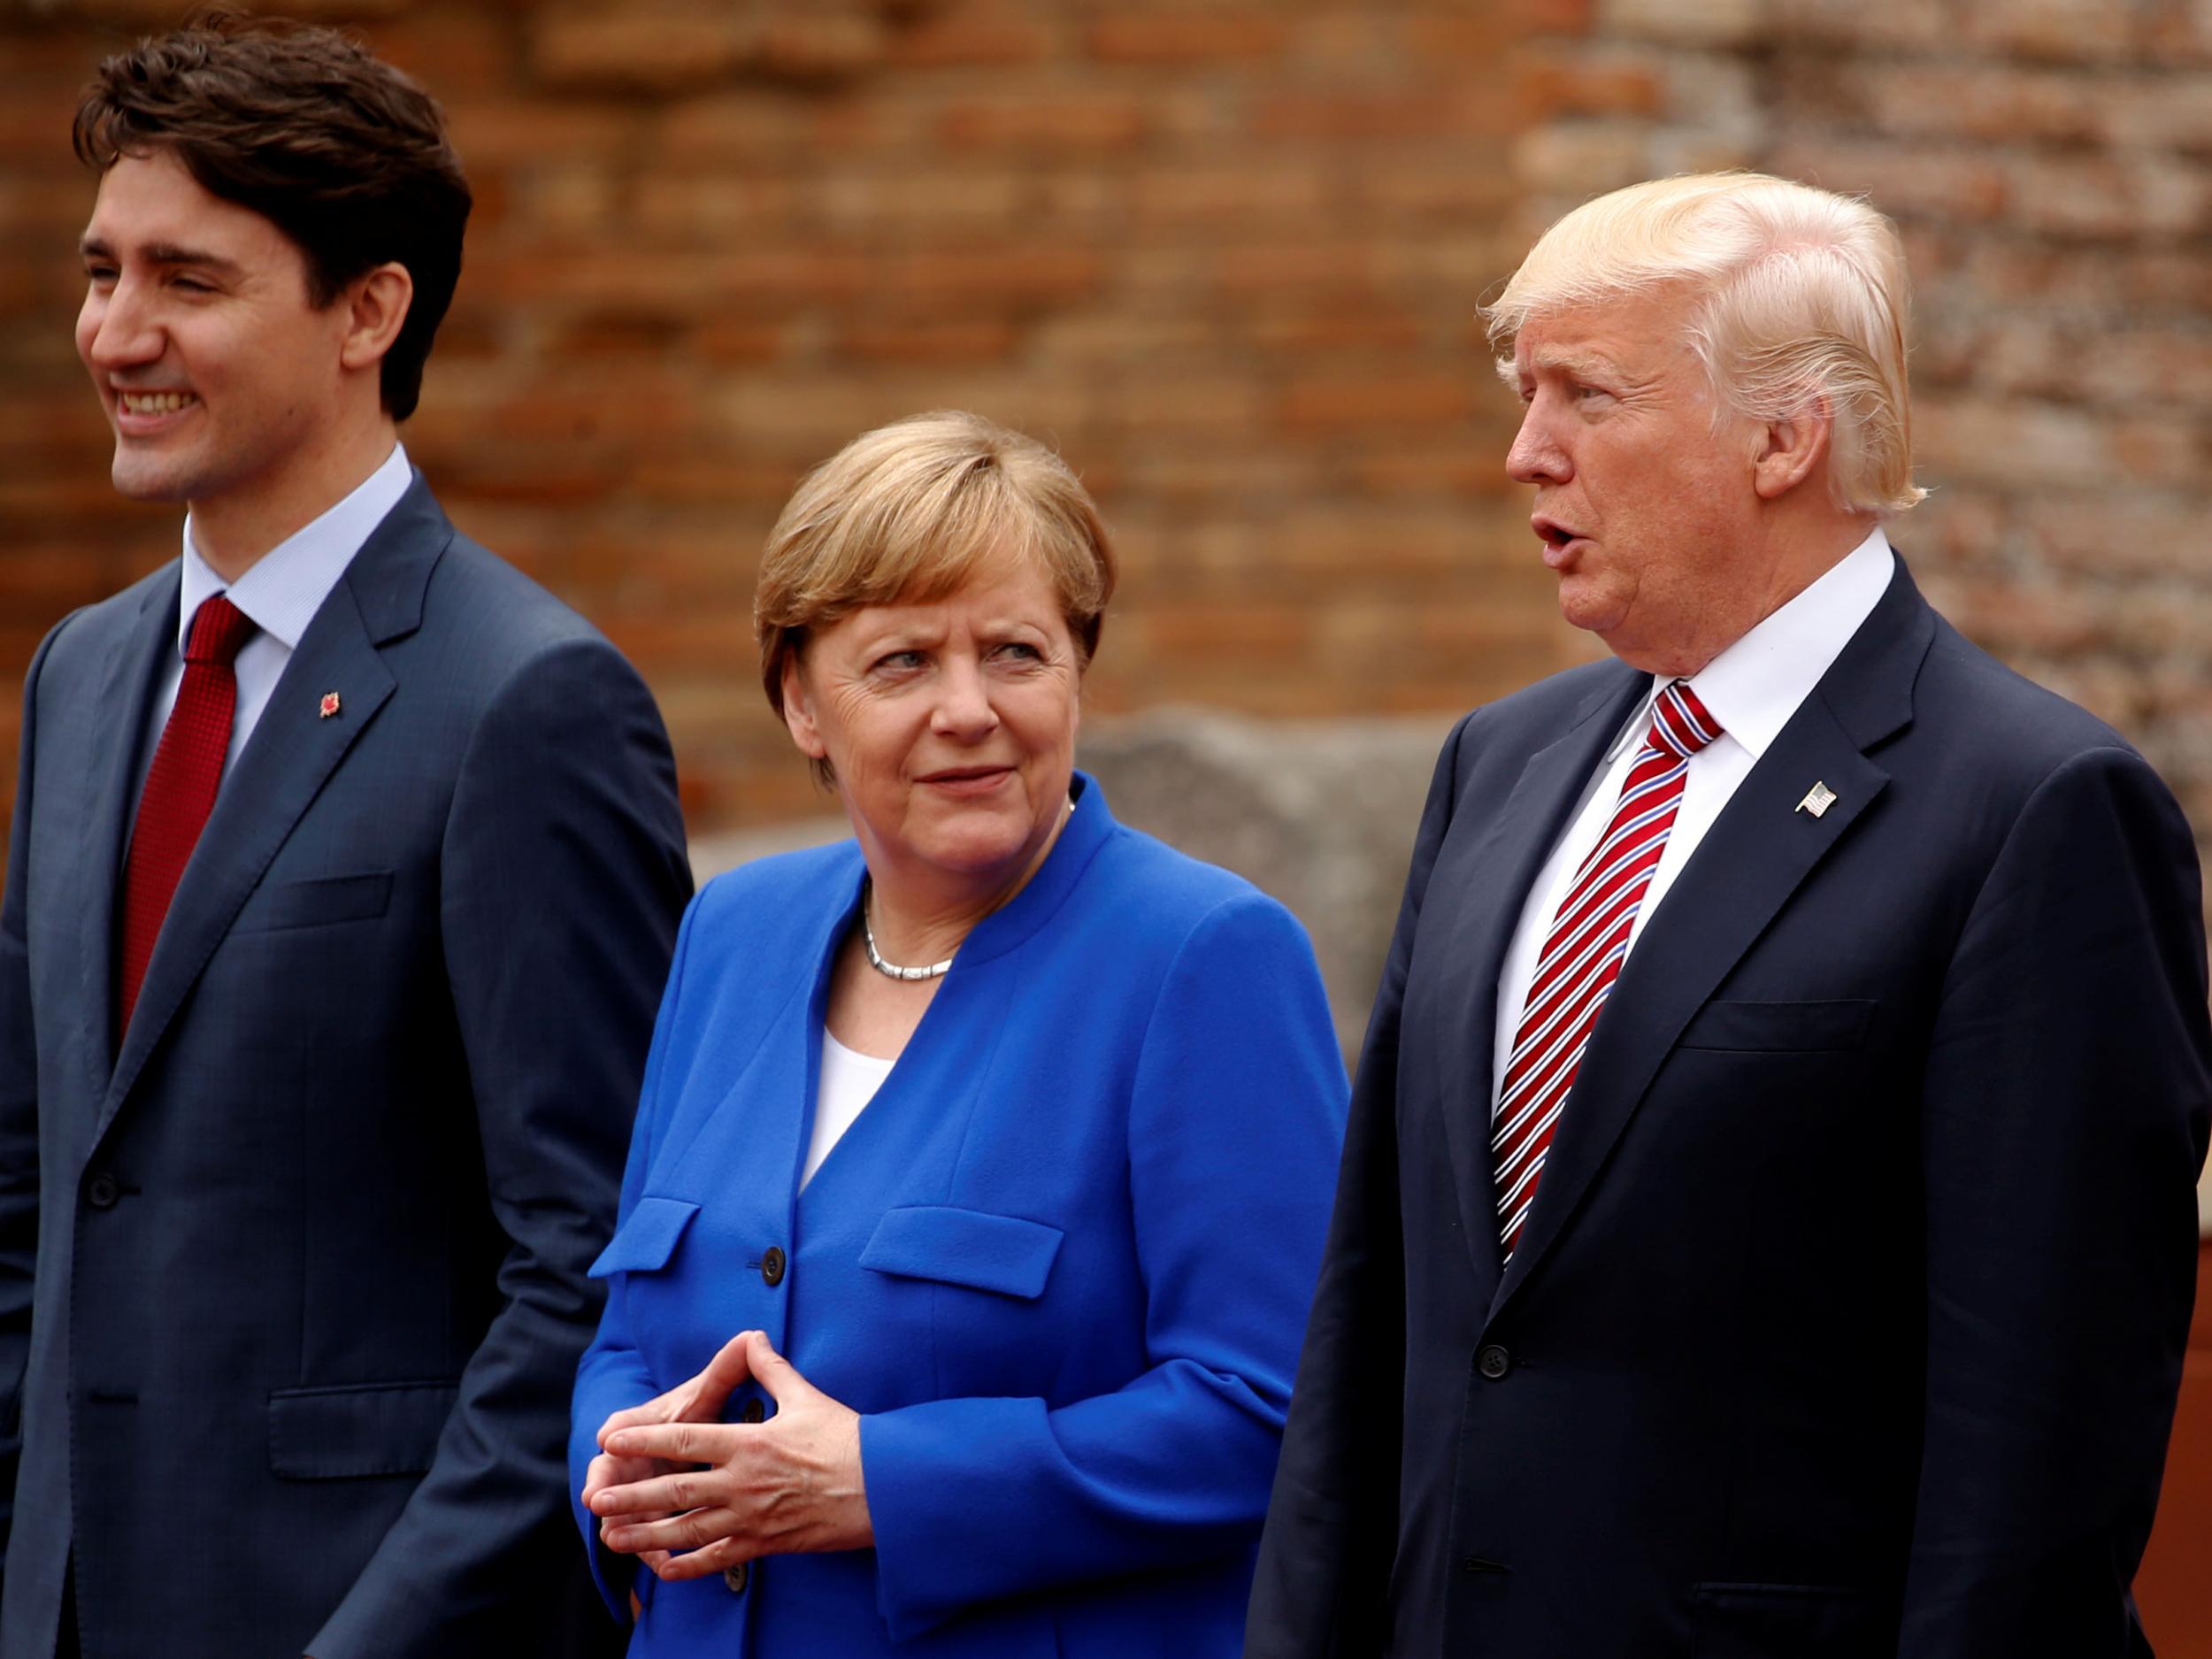 Angela Merkel with Canadian Prime Minister Justin Trudeau and Donald Trump at the G7 Summit in Taormina, Sicily